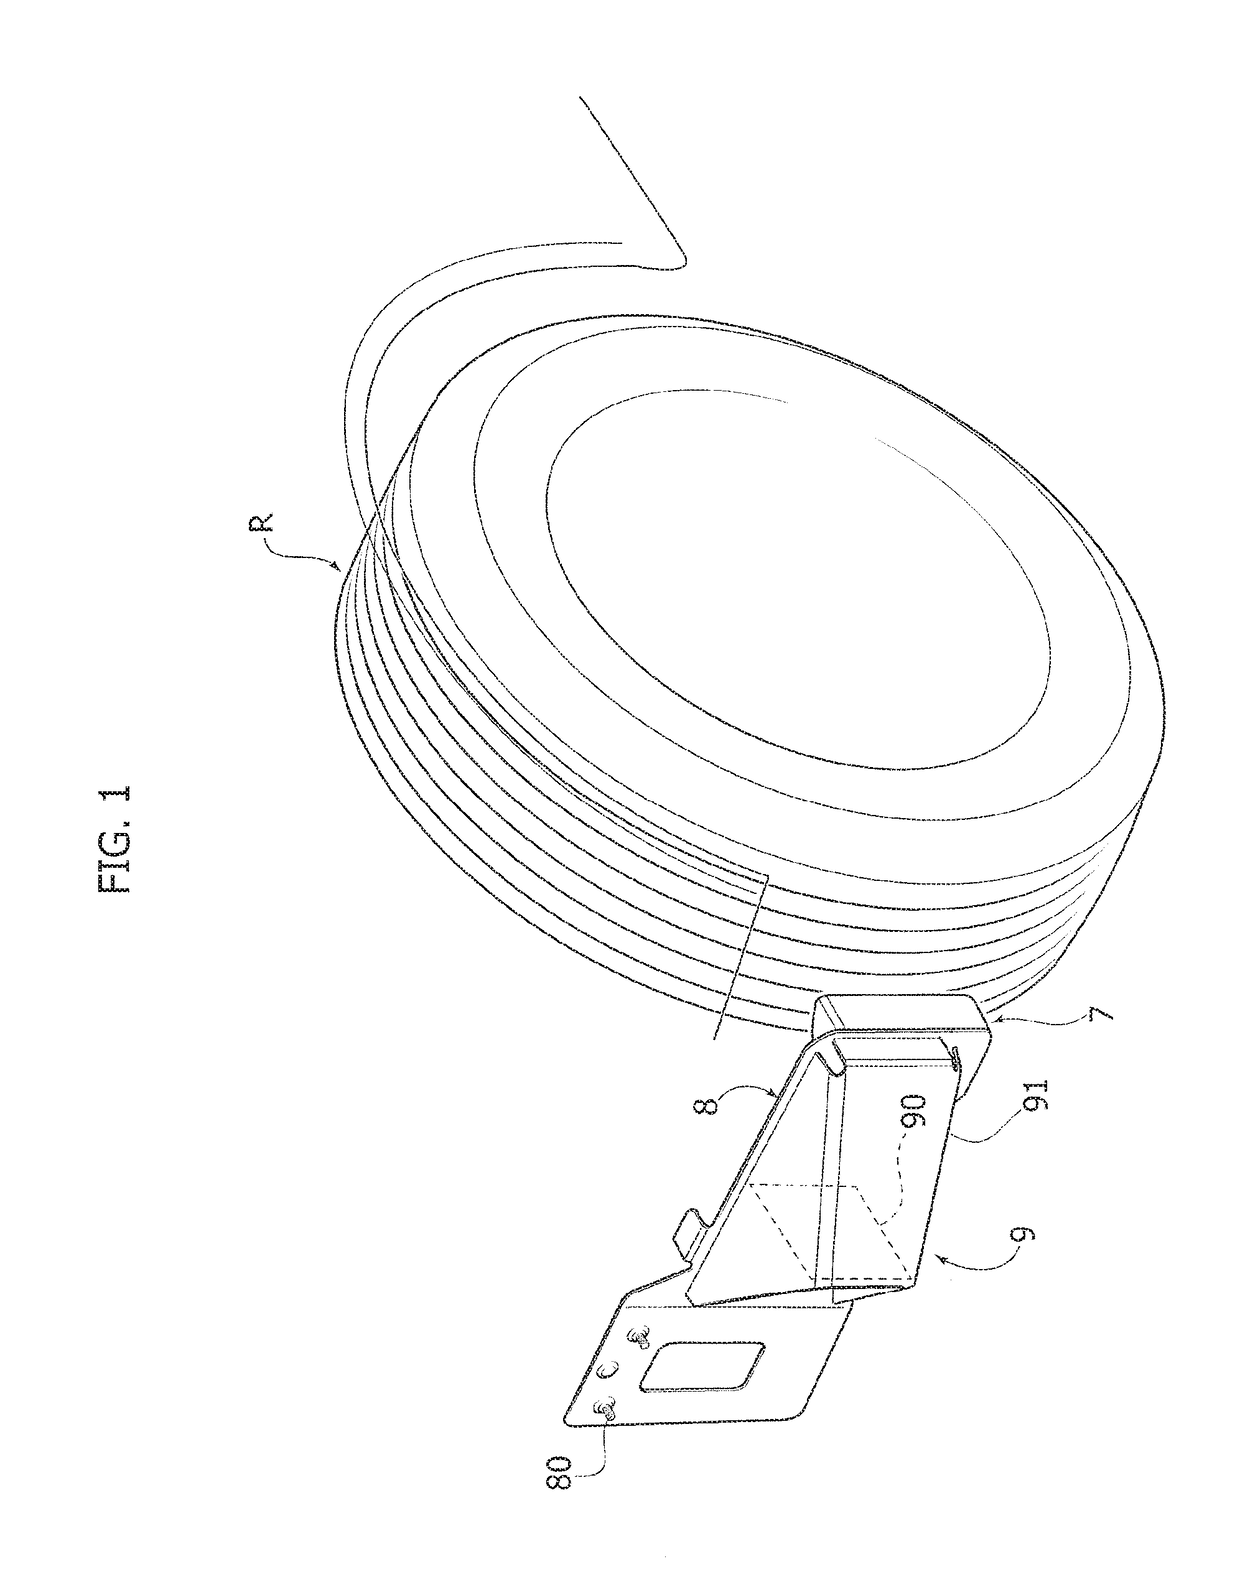 Safety device for orienting a motor-vehicle front wheel transversally to the longitudinal direction following a collision